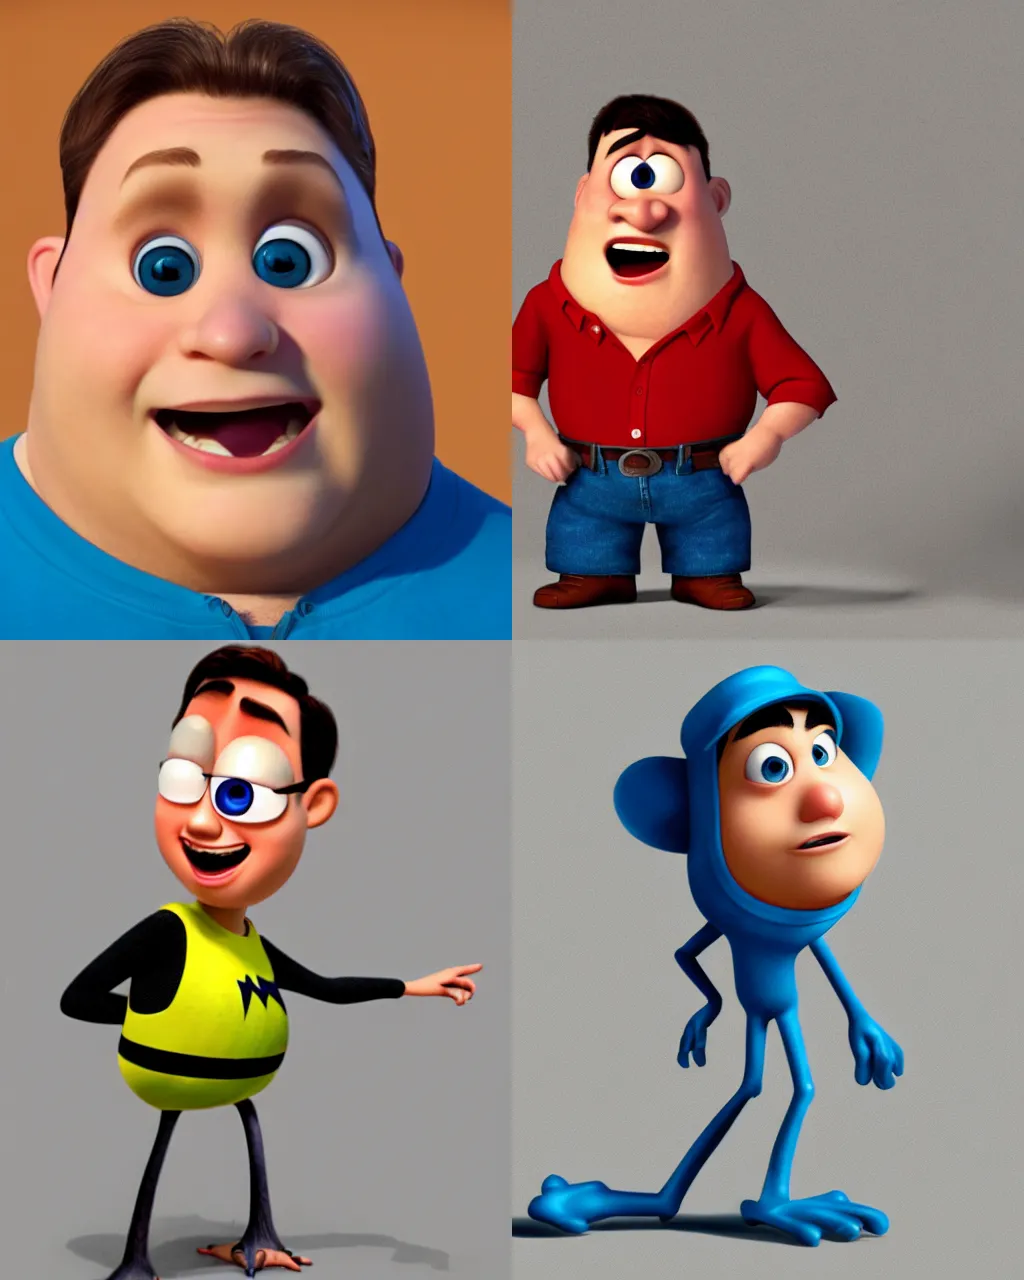 Prompt: Medium shot of a typical character in the style of Pixar